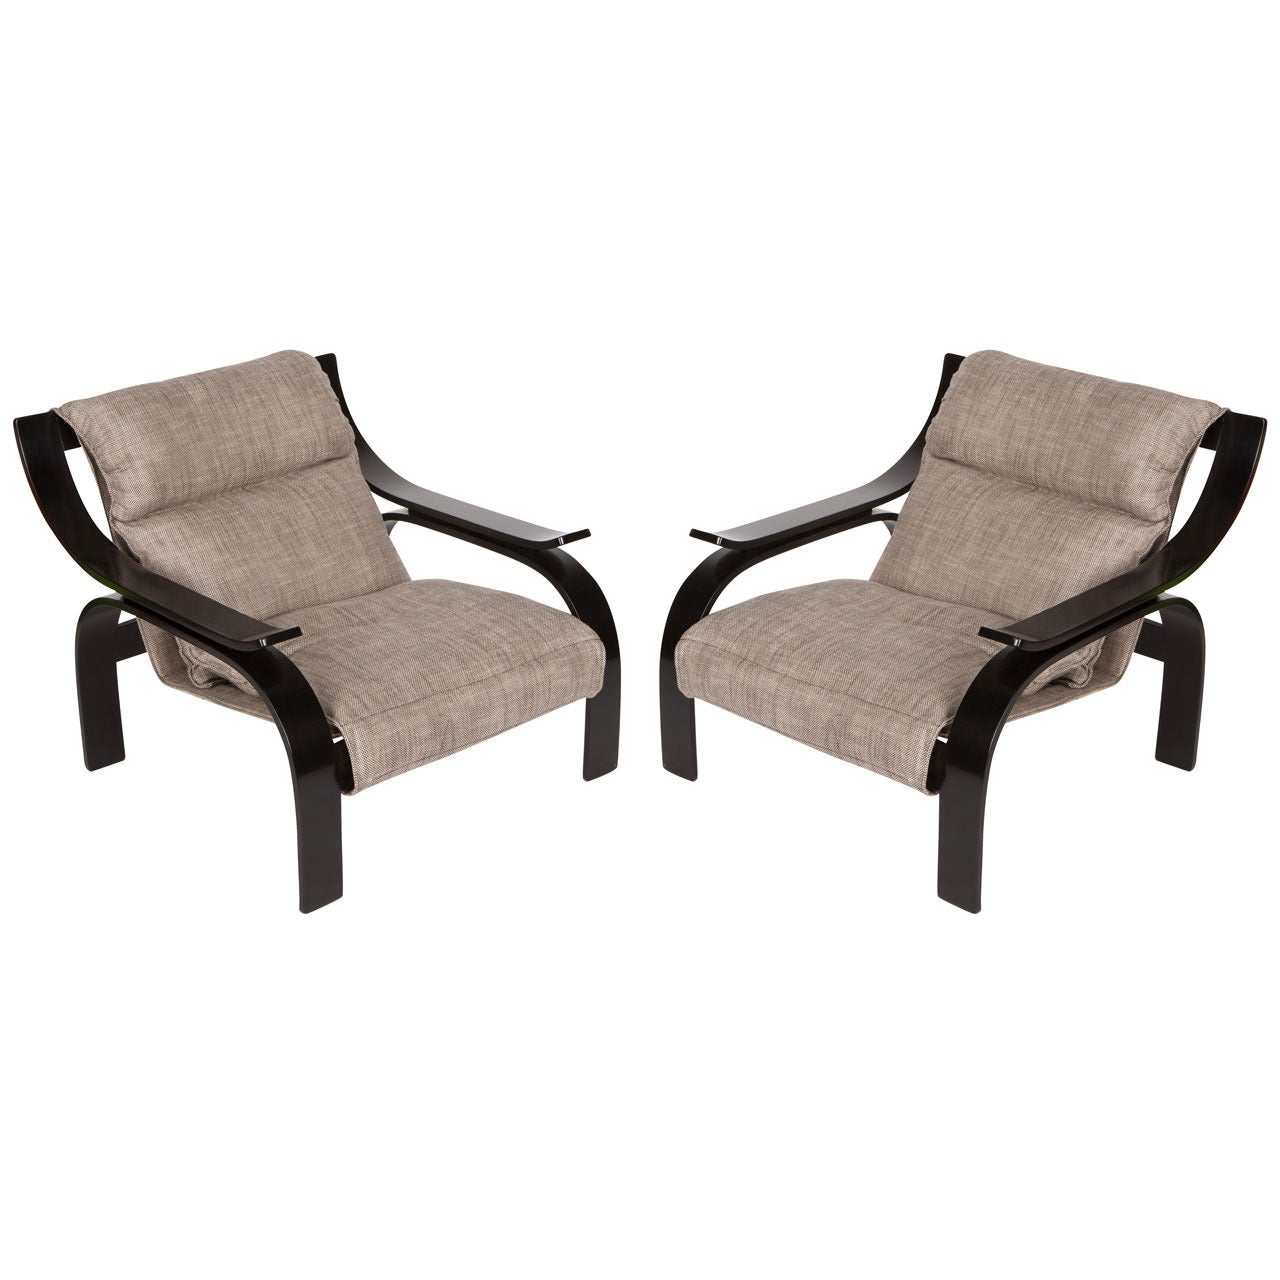 Pair of Woodline Lounge Chairs by Marco Zanuso for Arflex